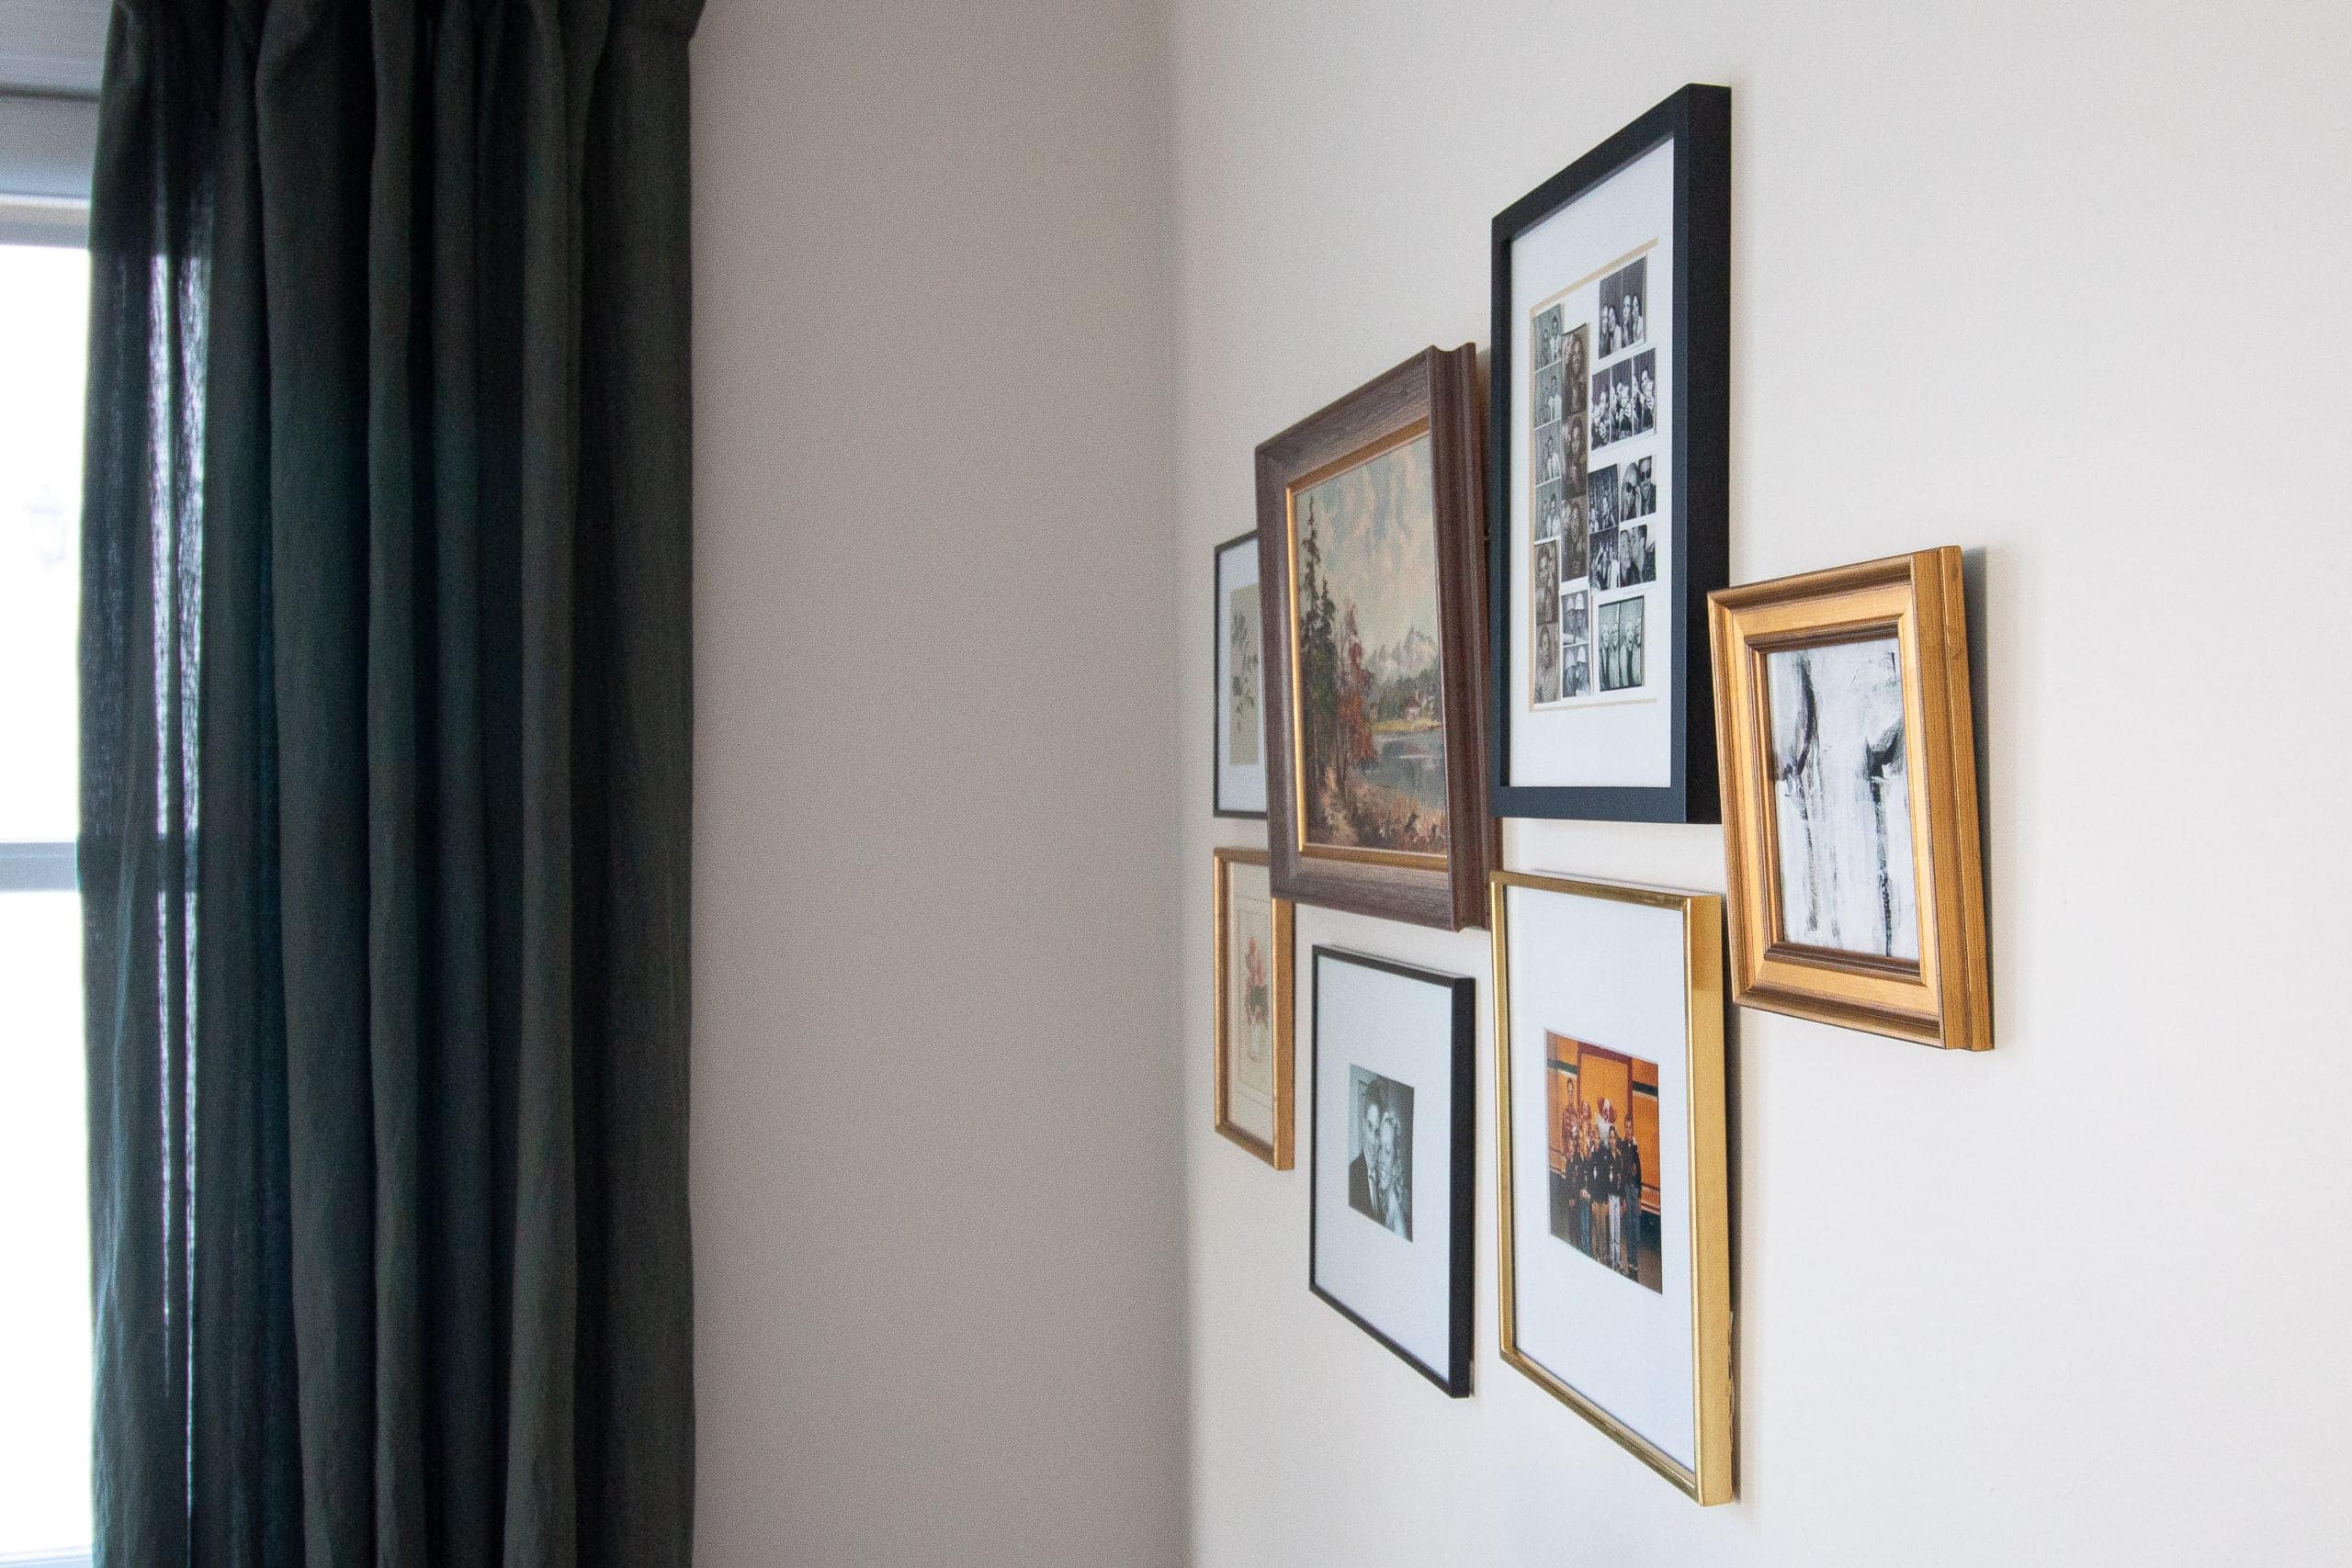 Our new living room gallery wall